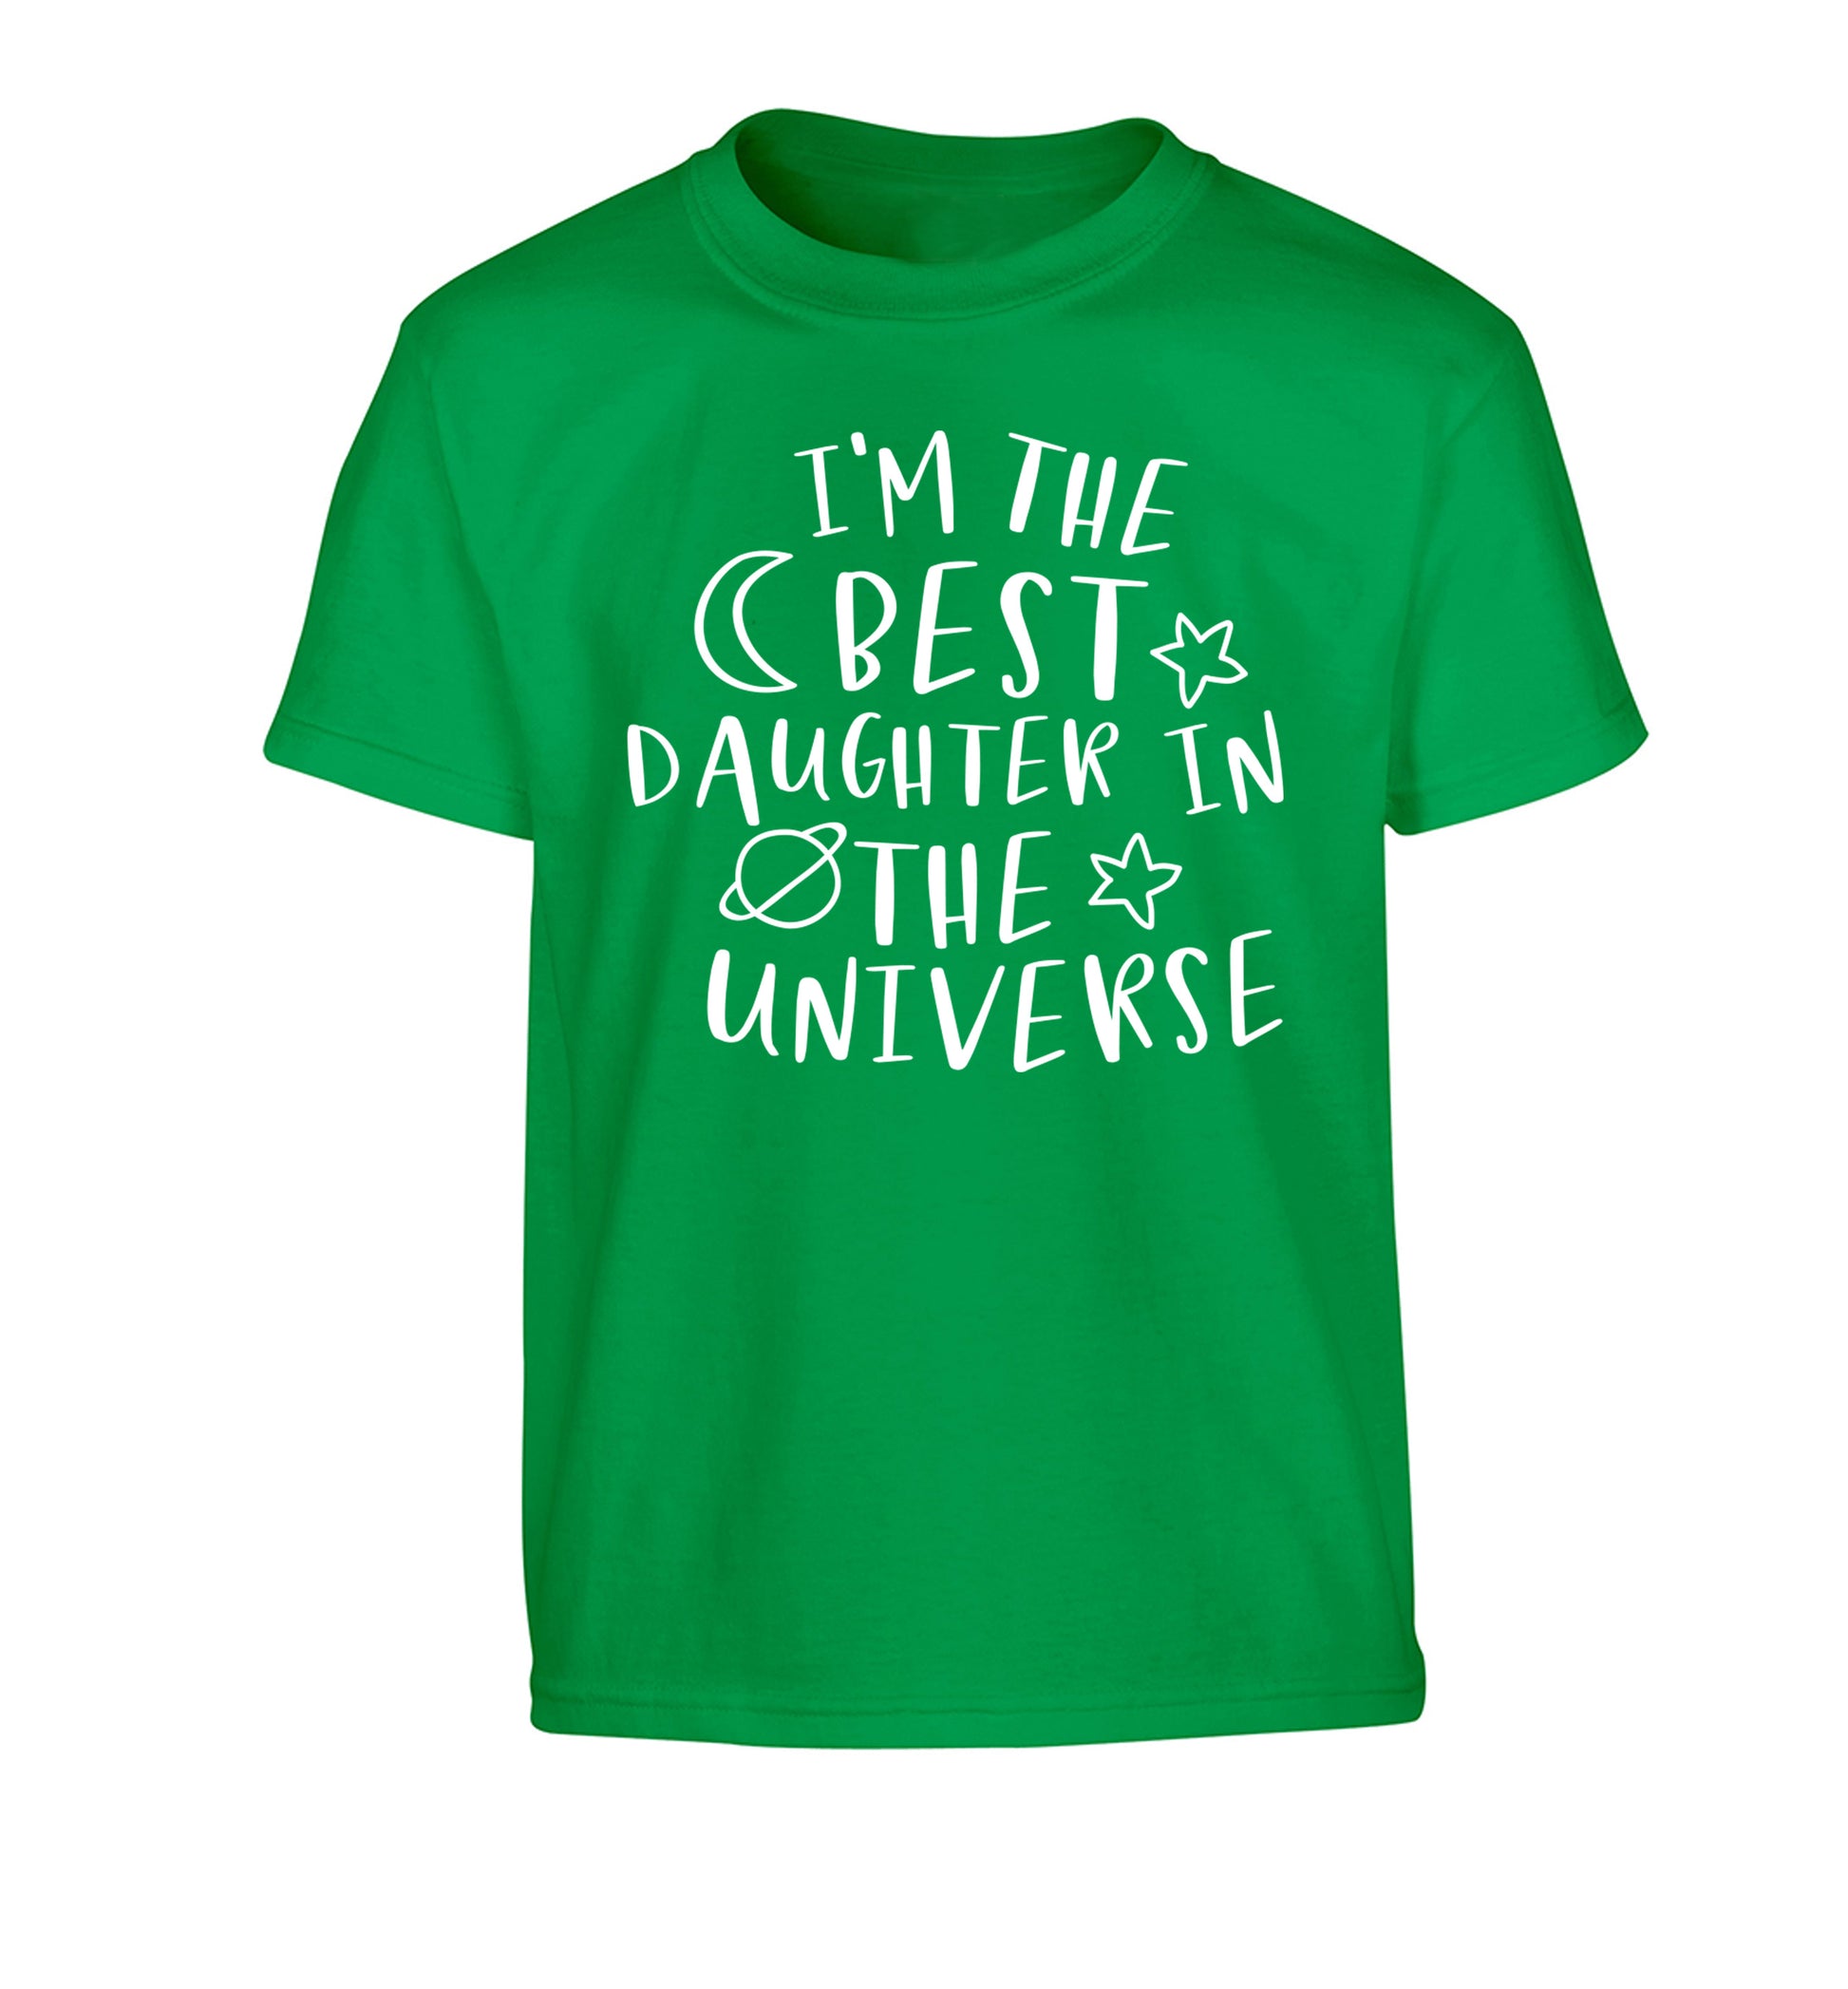 I'm the best daughter in the universe Children's green Tshirt 12-13 Years